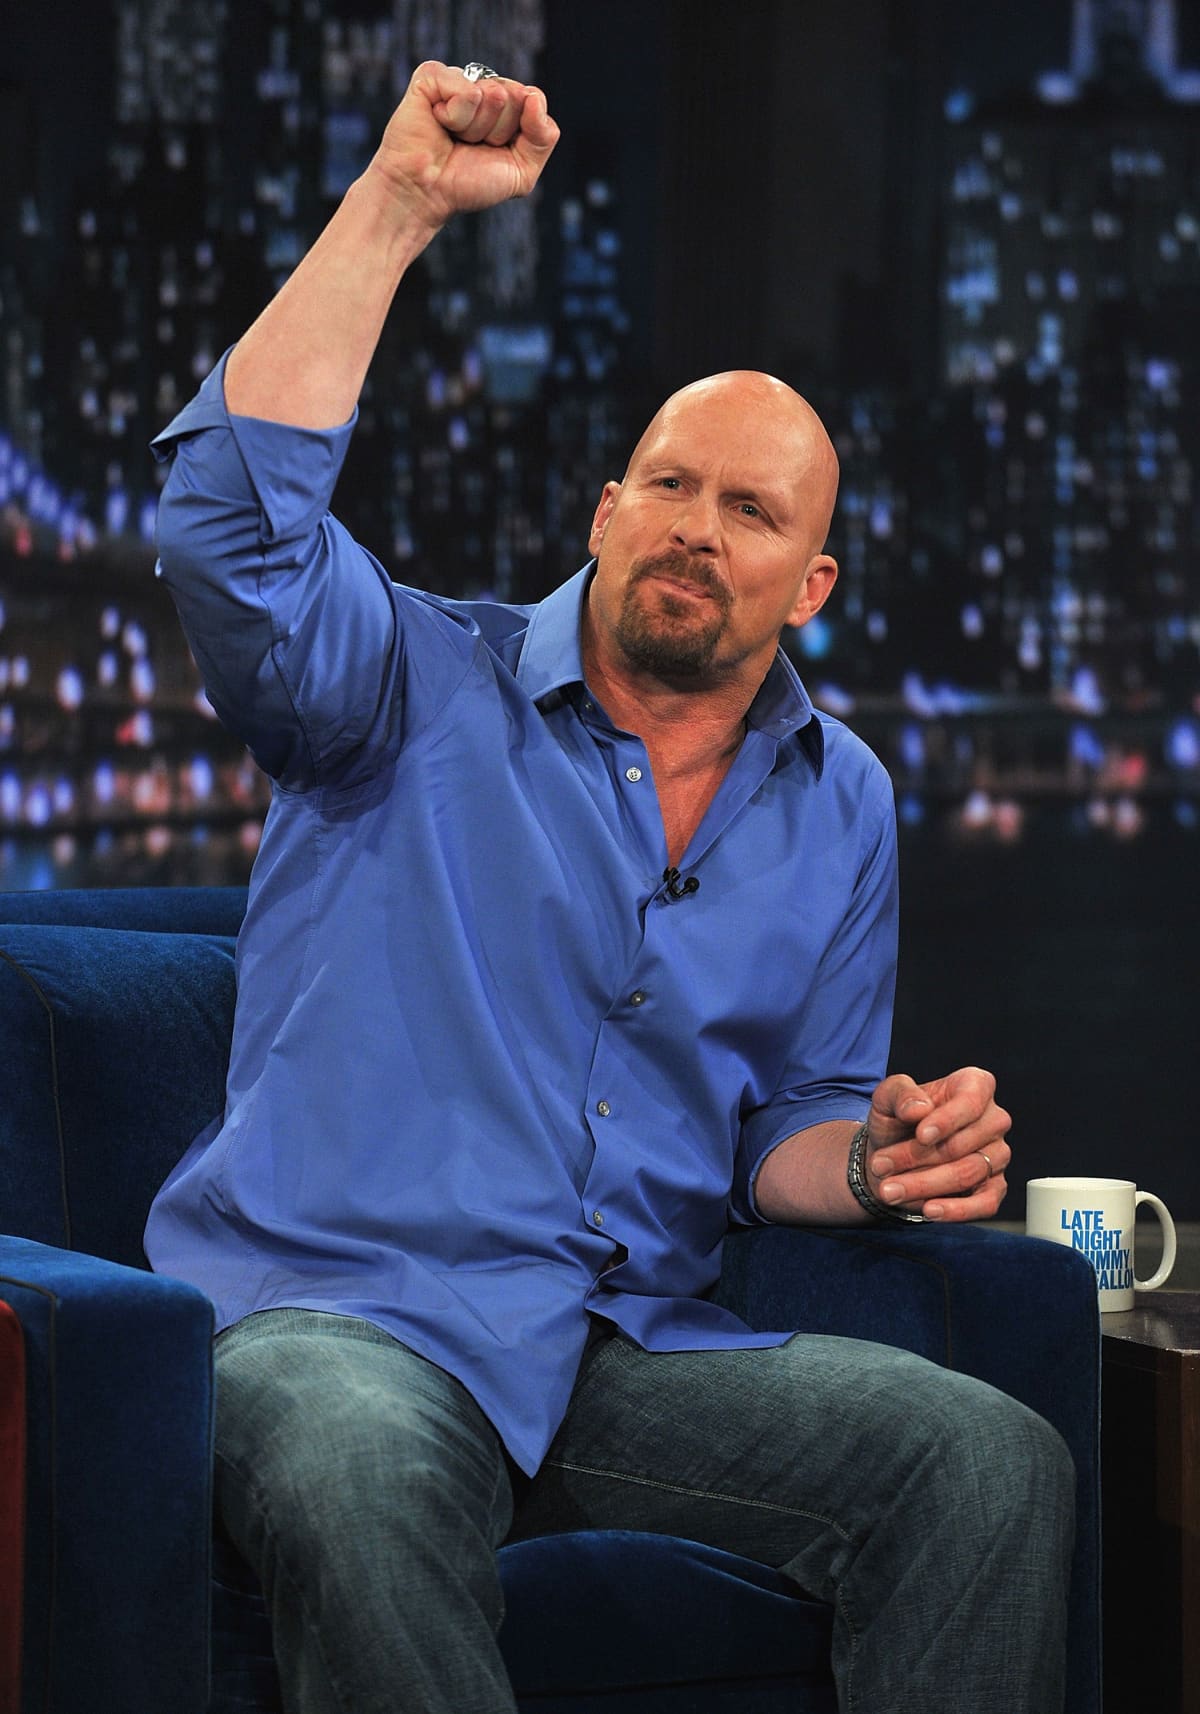 Stone Cold Steve Austin visits "Late Night With Jimmy Fallon" at Rockefeller Center on May 27, 2011 in New York City. (Photo by Theo Wargo/WireImage)